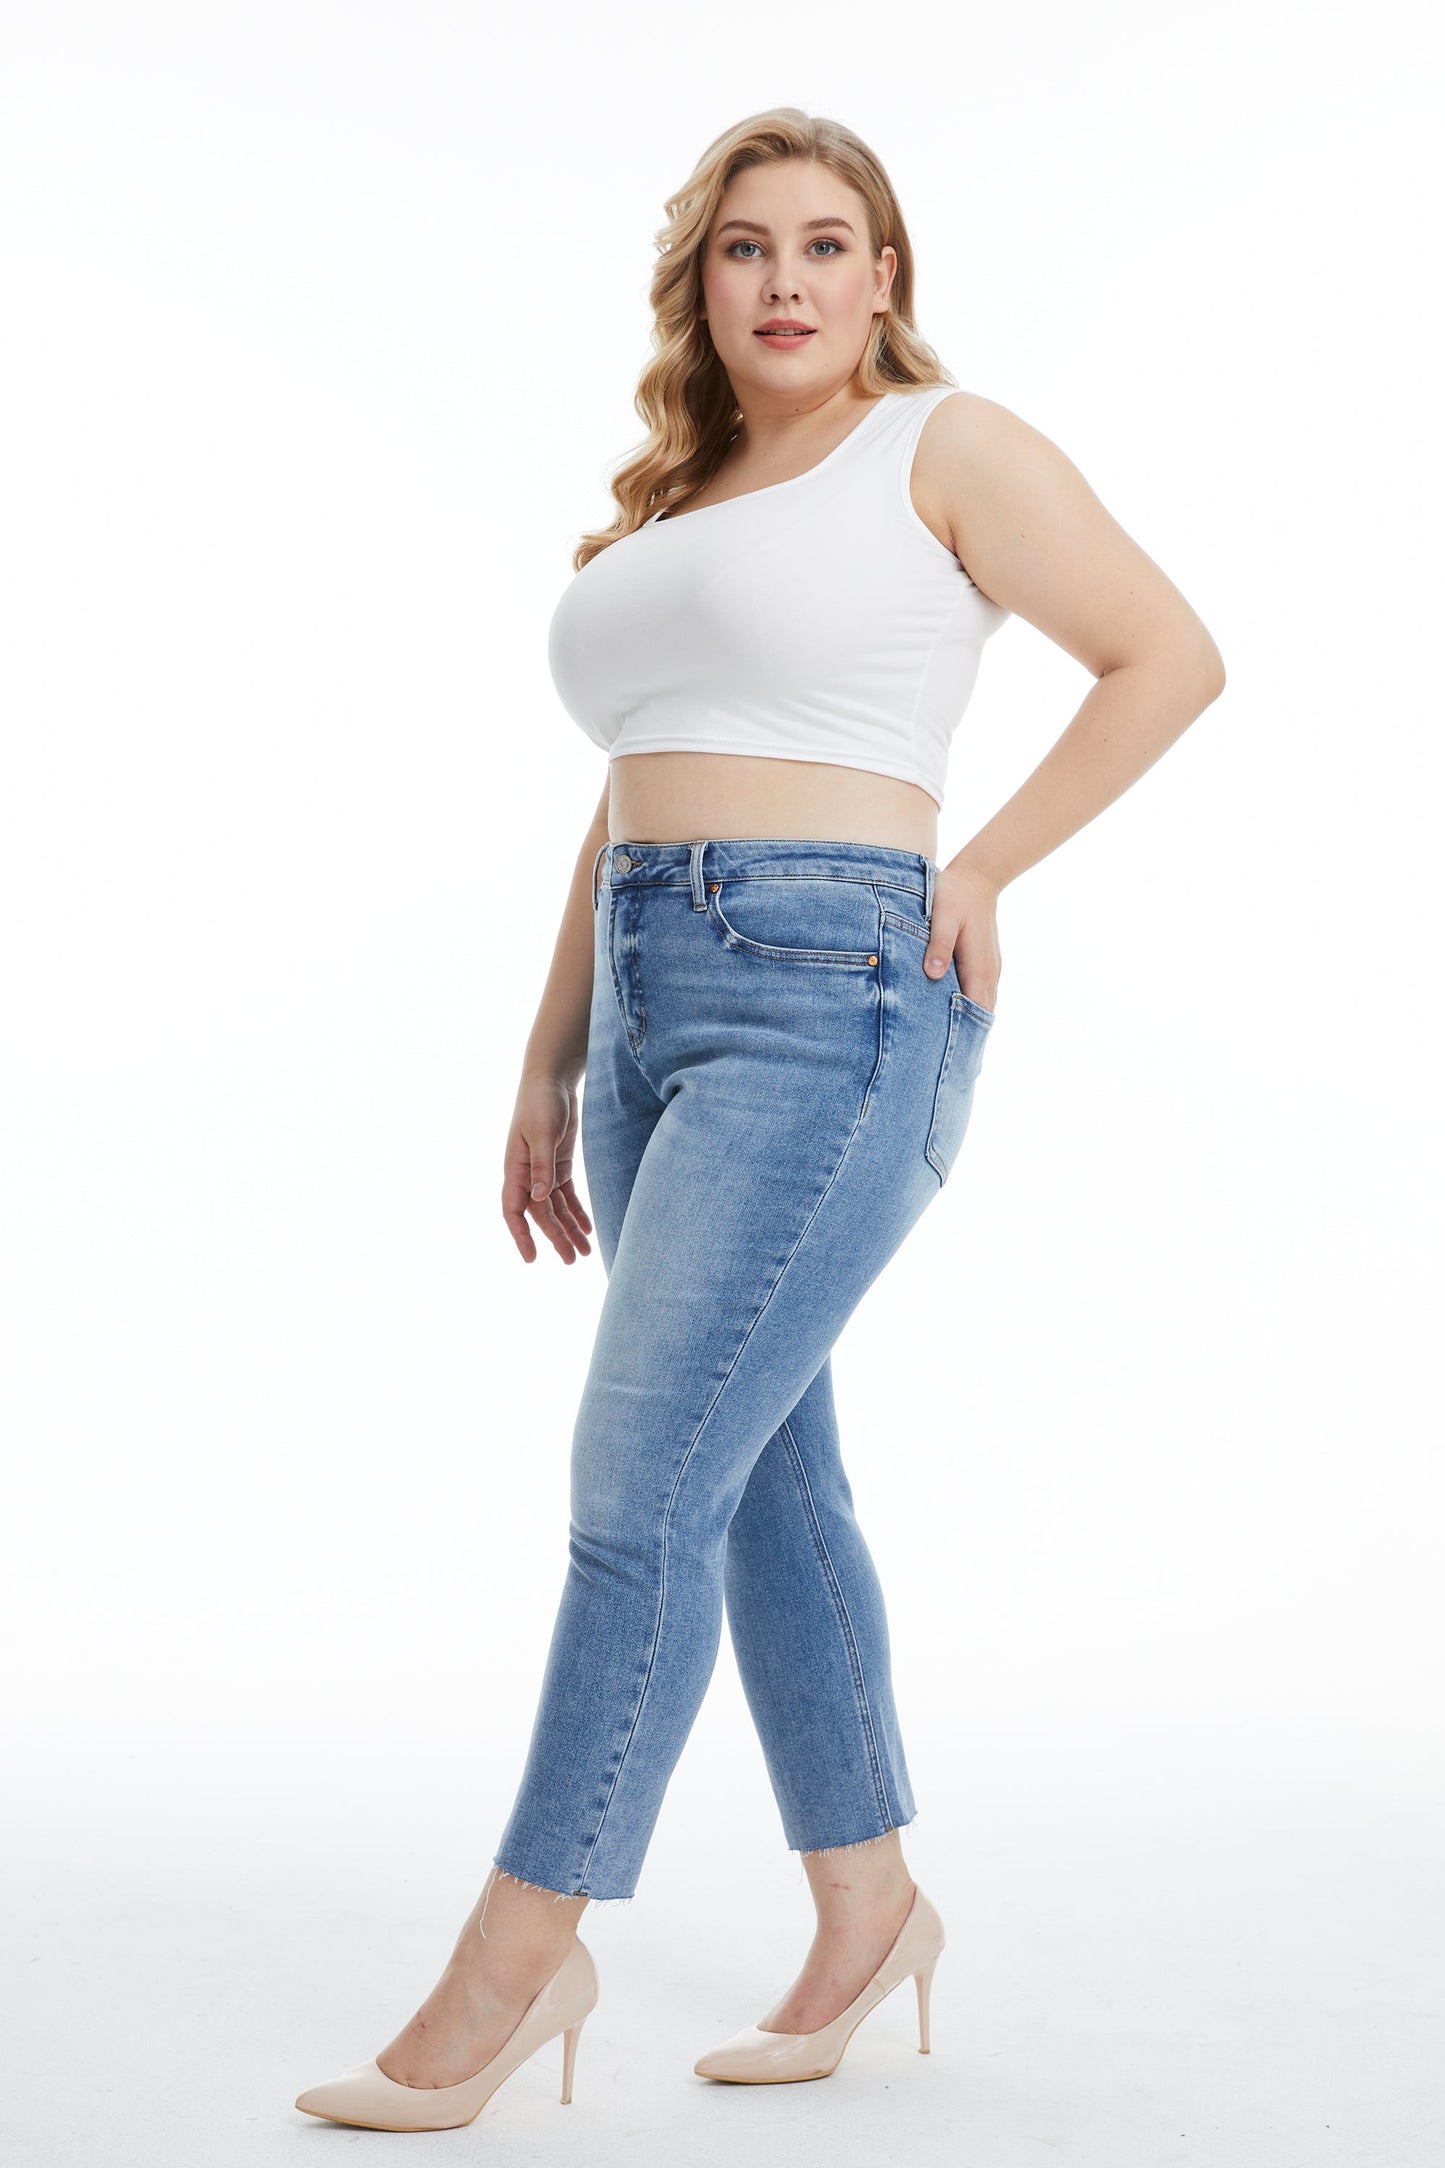 MID RISE SKINNY JEANS ANKLE RAW HEM BYS2126-P (BYHE084-P) LONELY PLUS SIZE